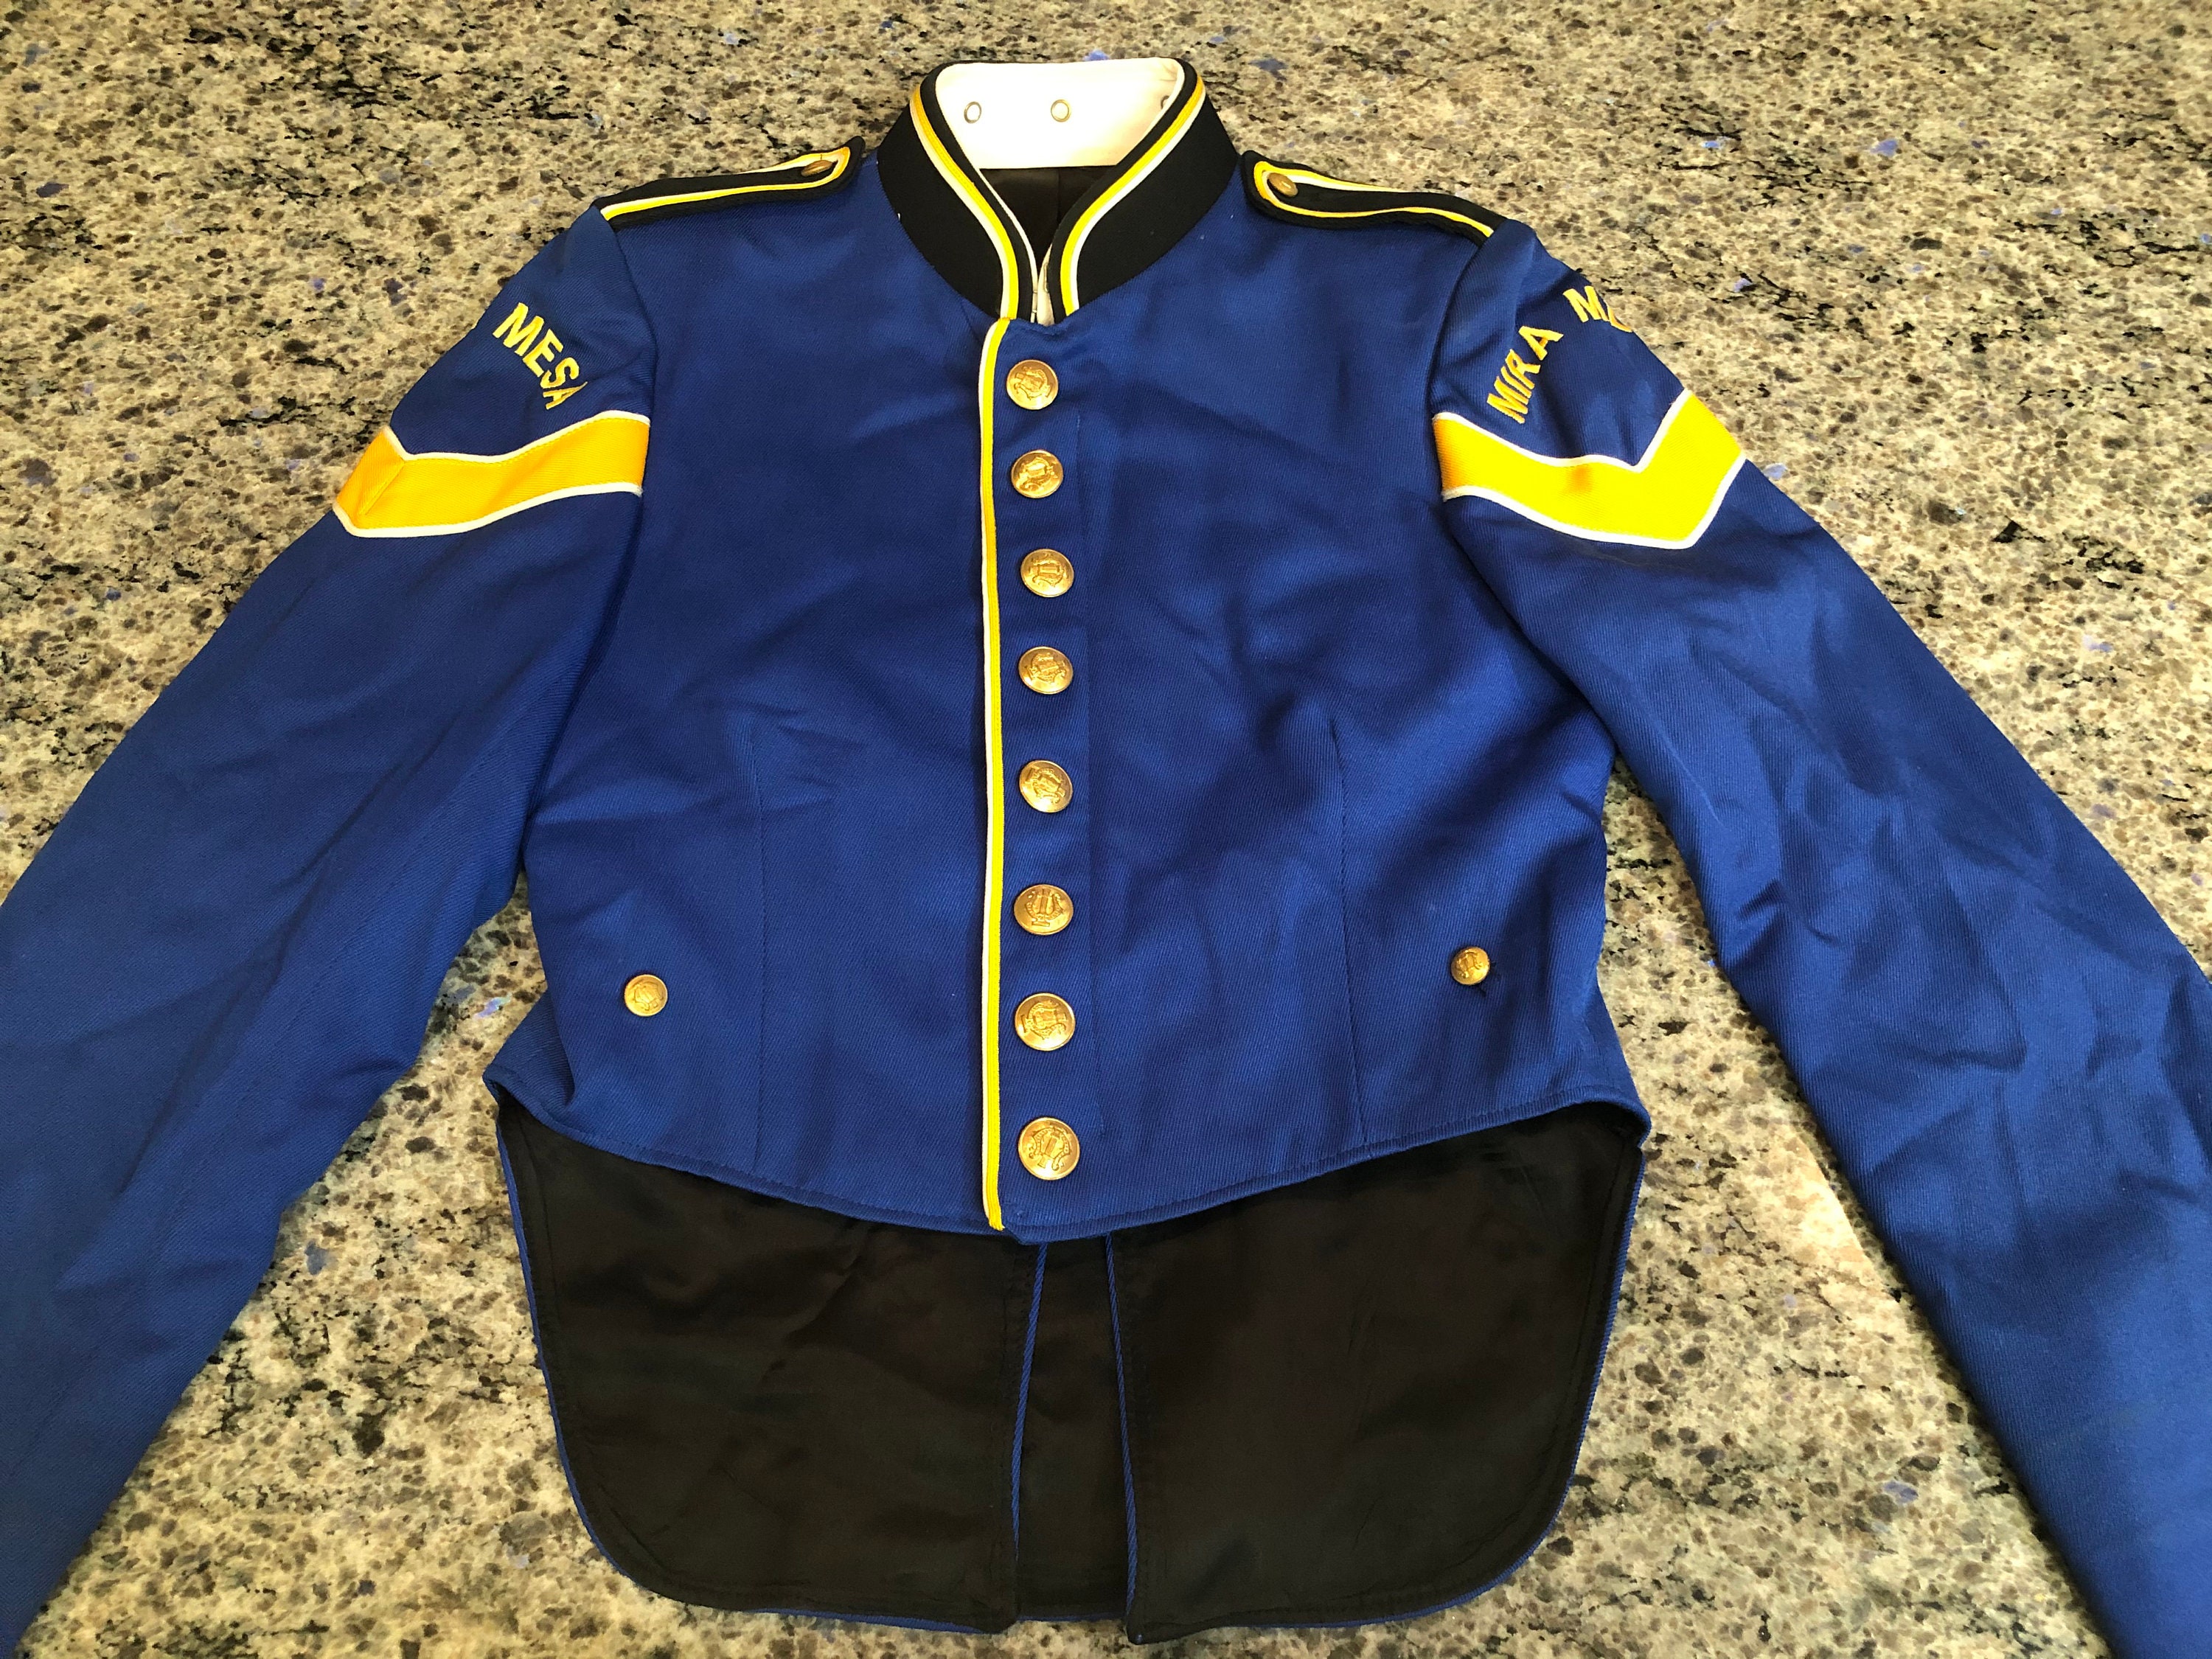 Best Deals for Marching Band Jacket